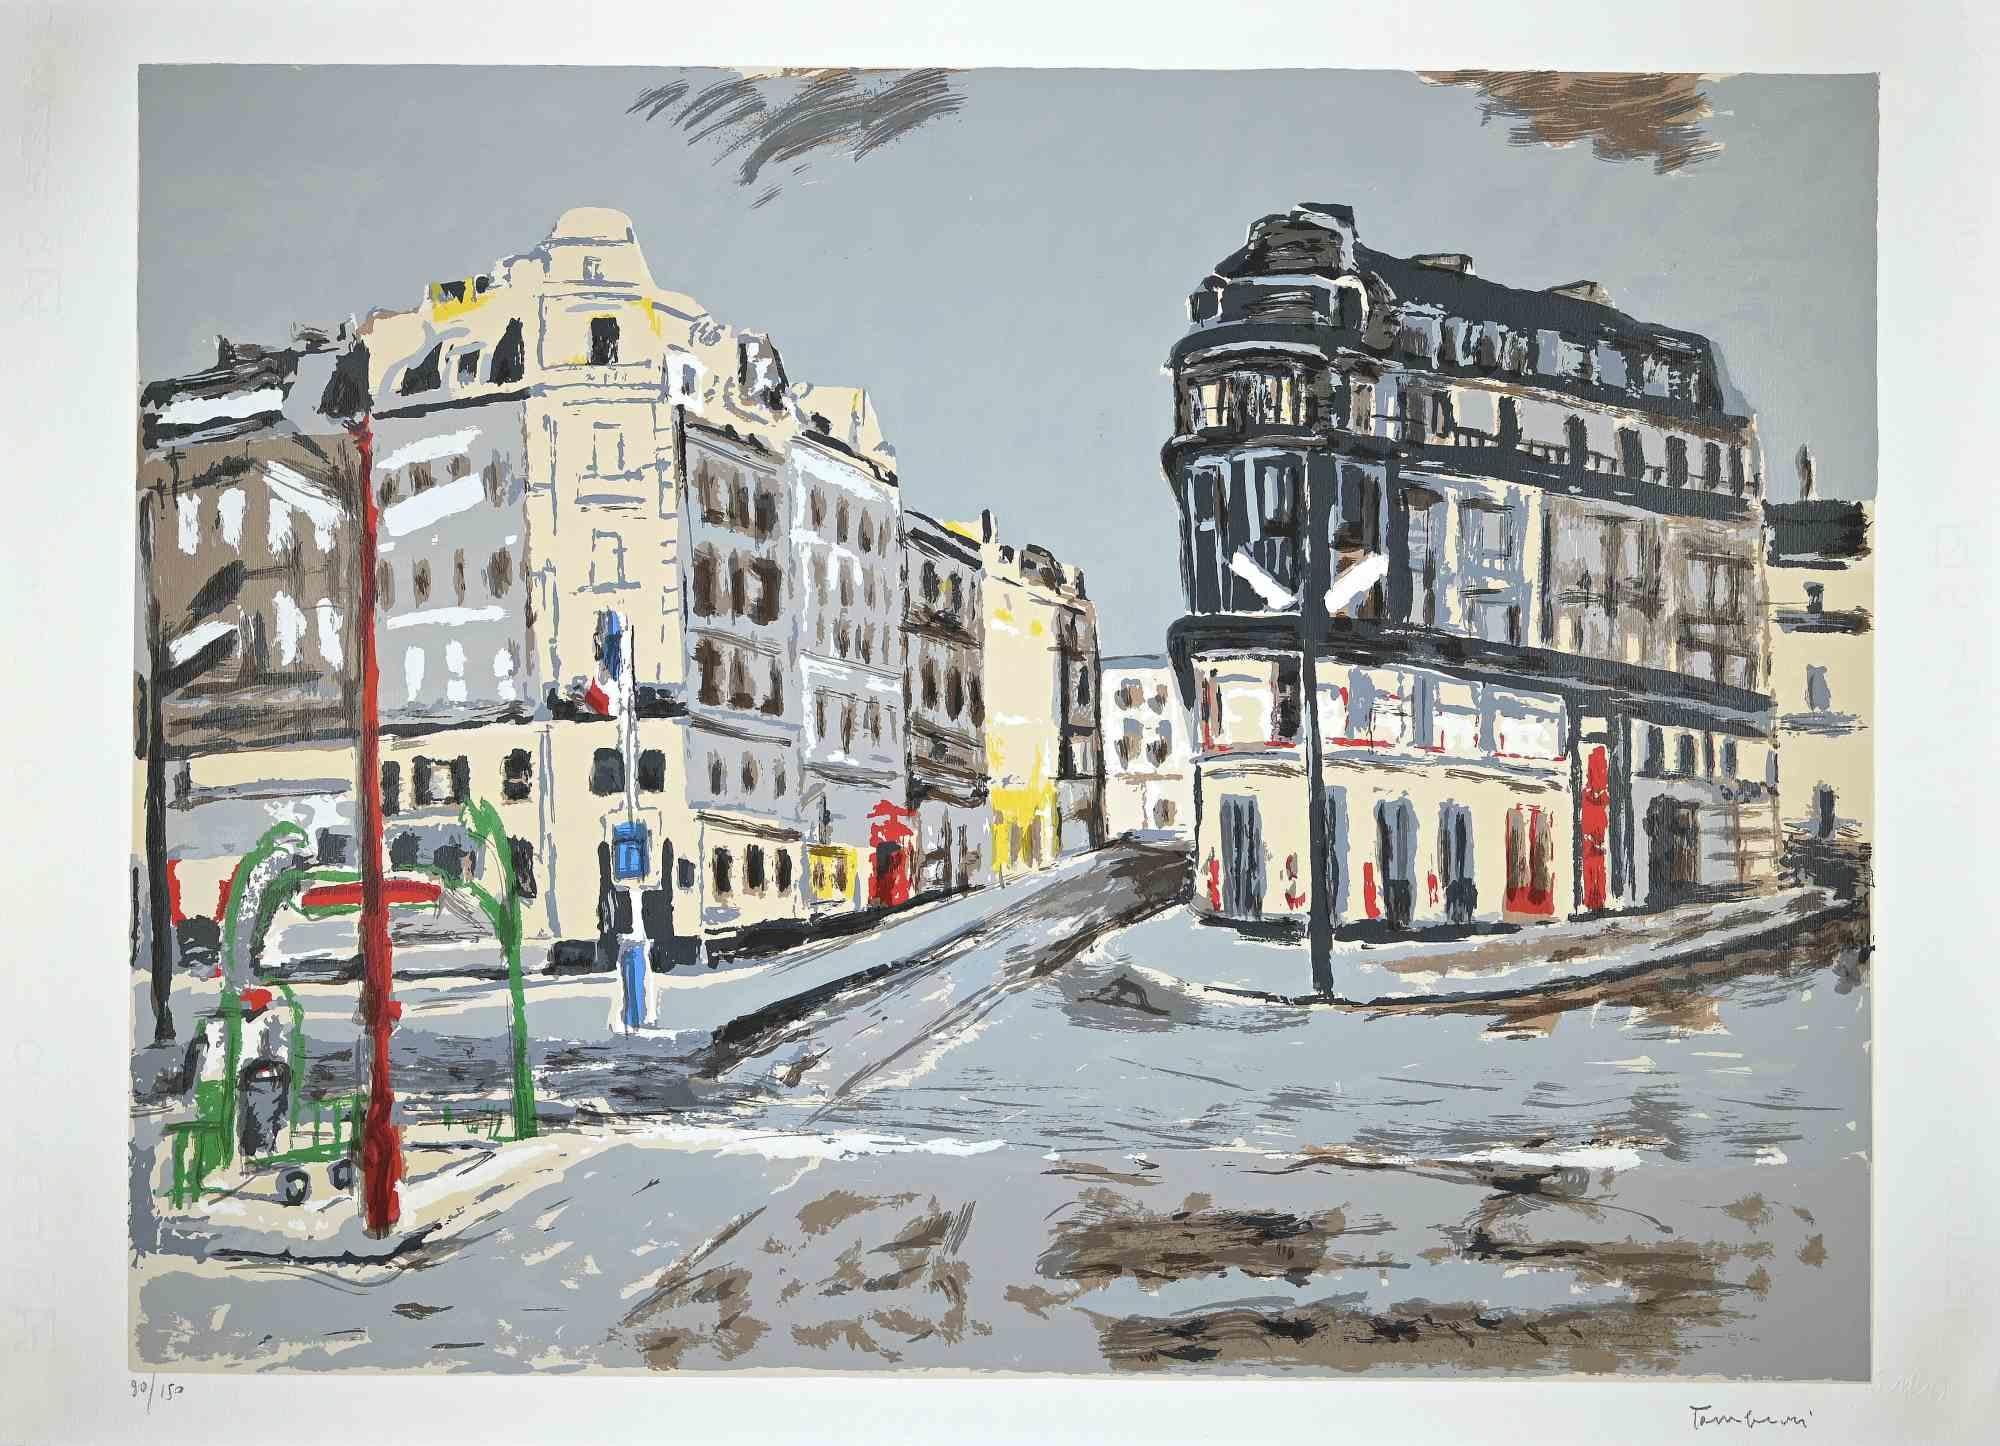 View of Paris is an original Modern artwork realized by Orfeo Tamburi  (Jesi, 1910 – Paris,1994)  in 1980s. 

Original Colored Lithograph on paper. 

Numbered. Edition, 90/150.

Good conditions. 